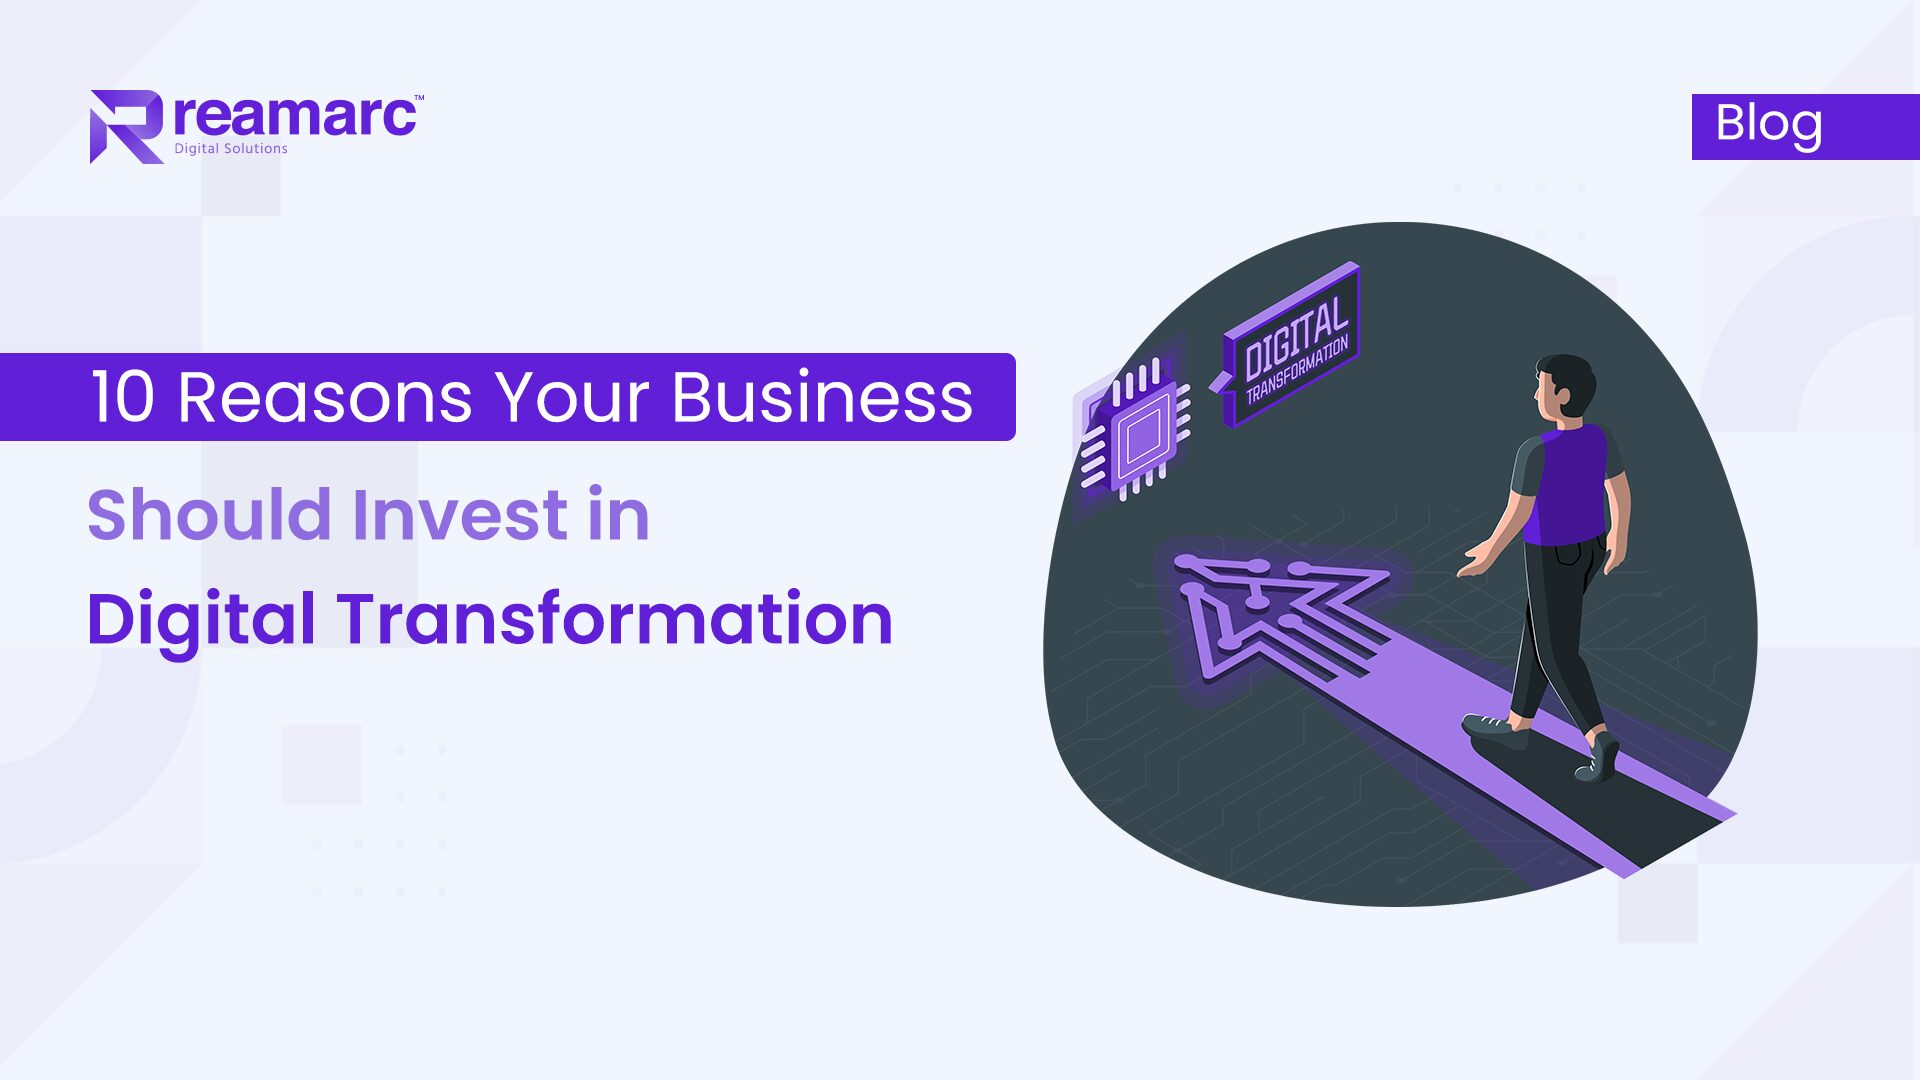 10 Reasons Your Business Should Invest in Digital Transformation